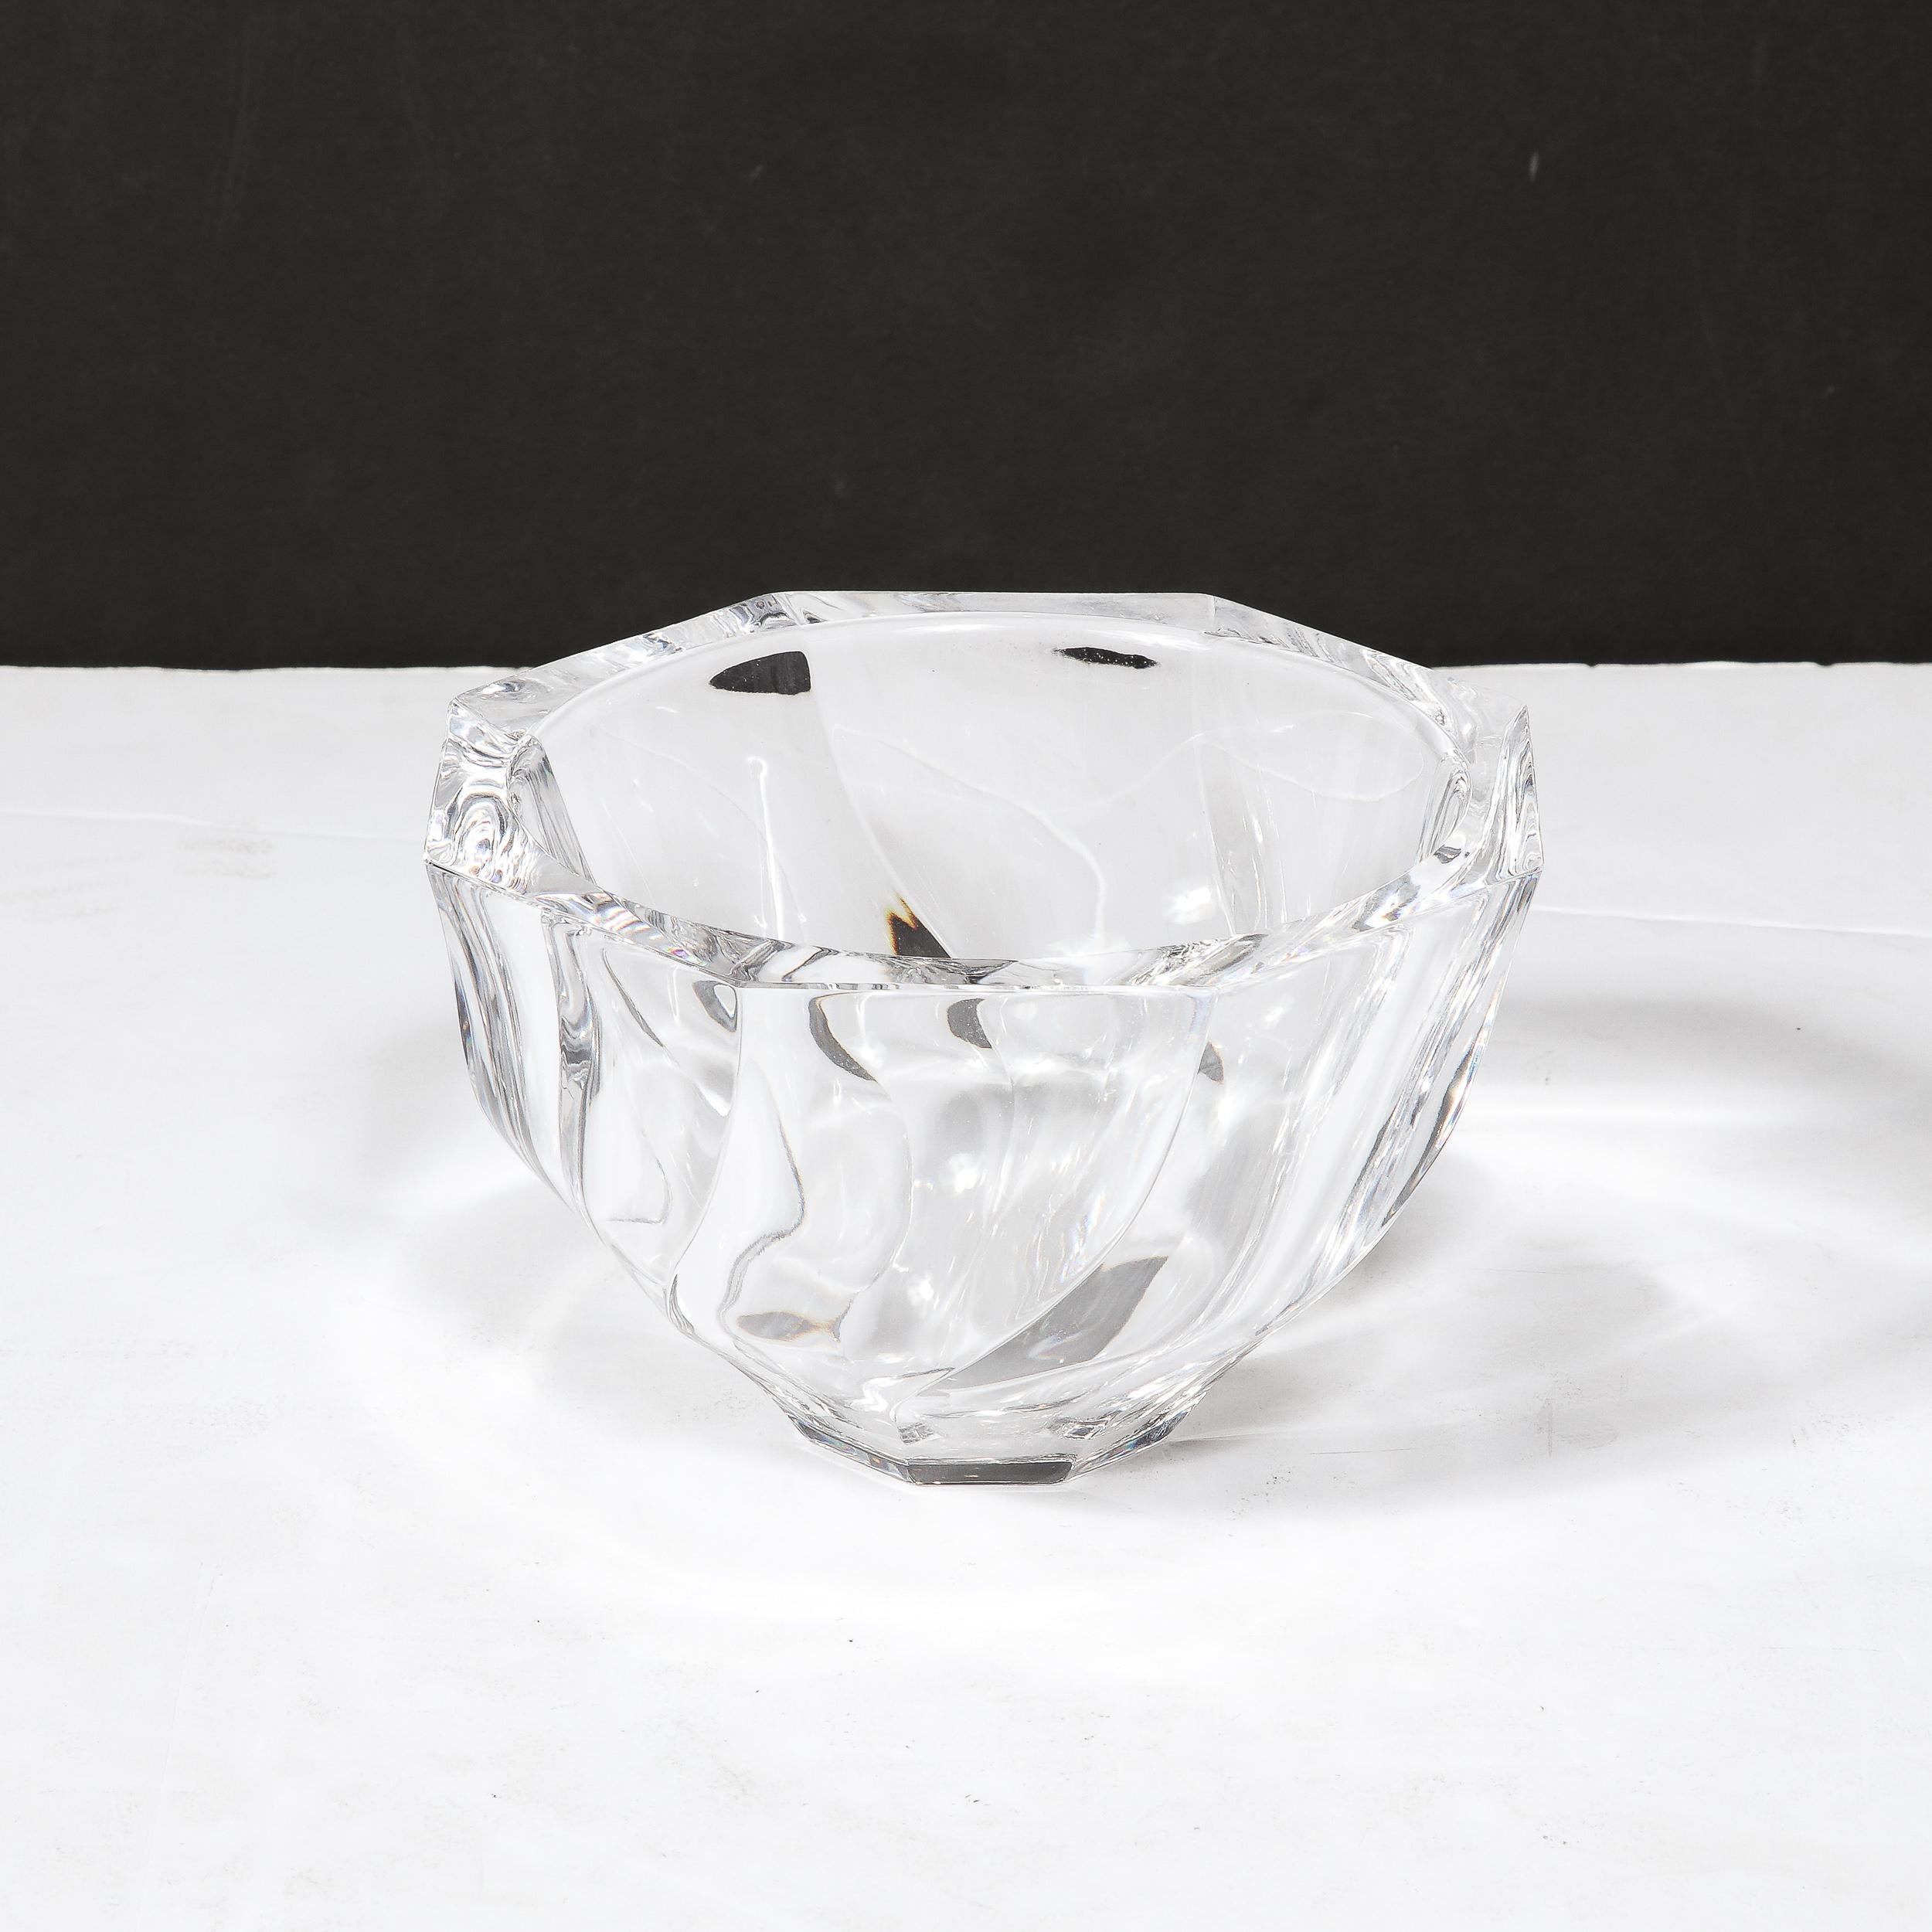 This Mid-Century Modernist Spiral Form crystal Bowl by Orrefors originates from Sweden, Circa 1950. Featuring an elegant and gently twisted composition rising from the modest octagonal base, the sides bend inward to form striking edges curving